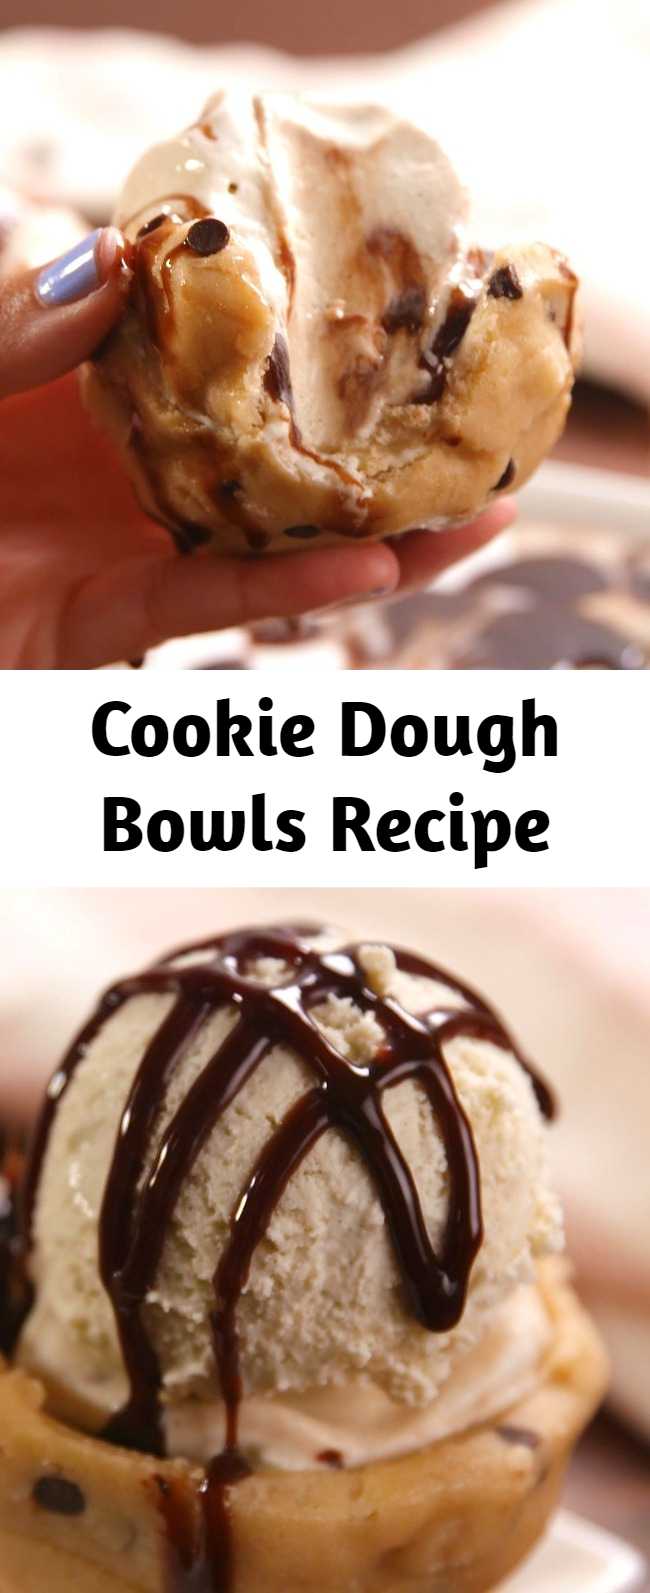 All bowls should be edible bowls. #easy #recipe #edible #cookiedough #cookie #bowls #icecream #birthdaypartyideas #summer #partyideas #chocolate #chocolatechip #sauce